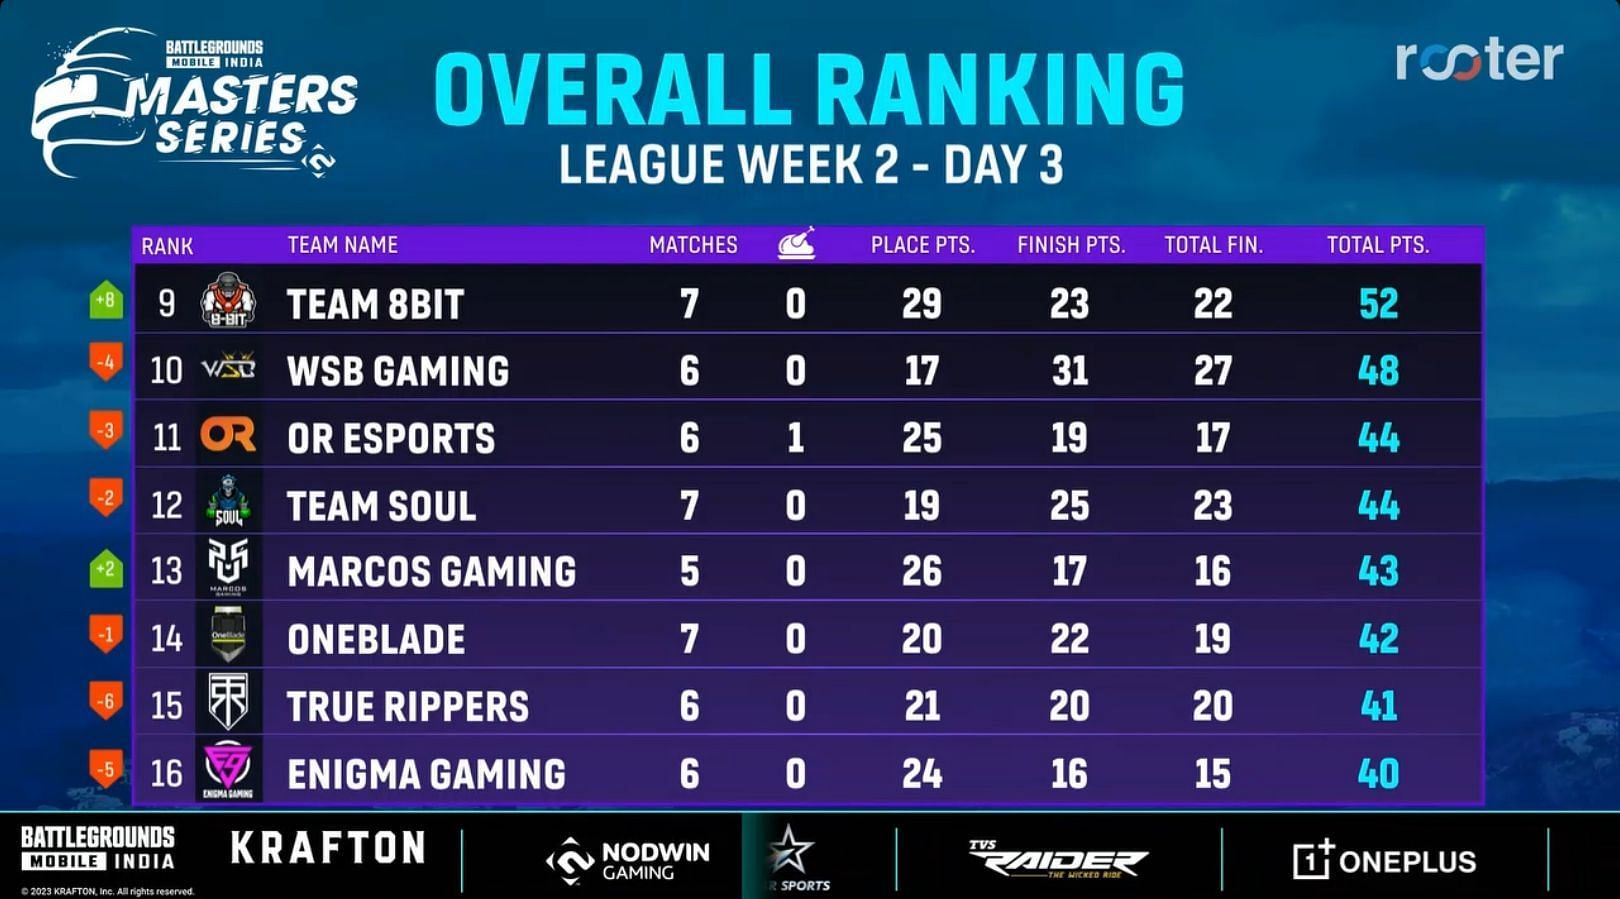 Team Soul moved up to 12th place after seven matches (Image via Rooter)